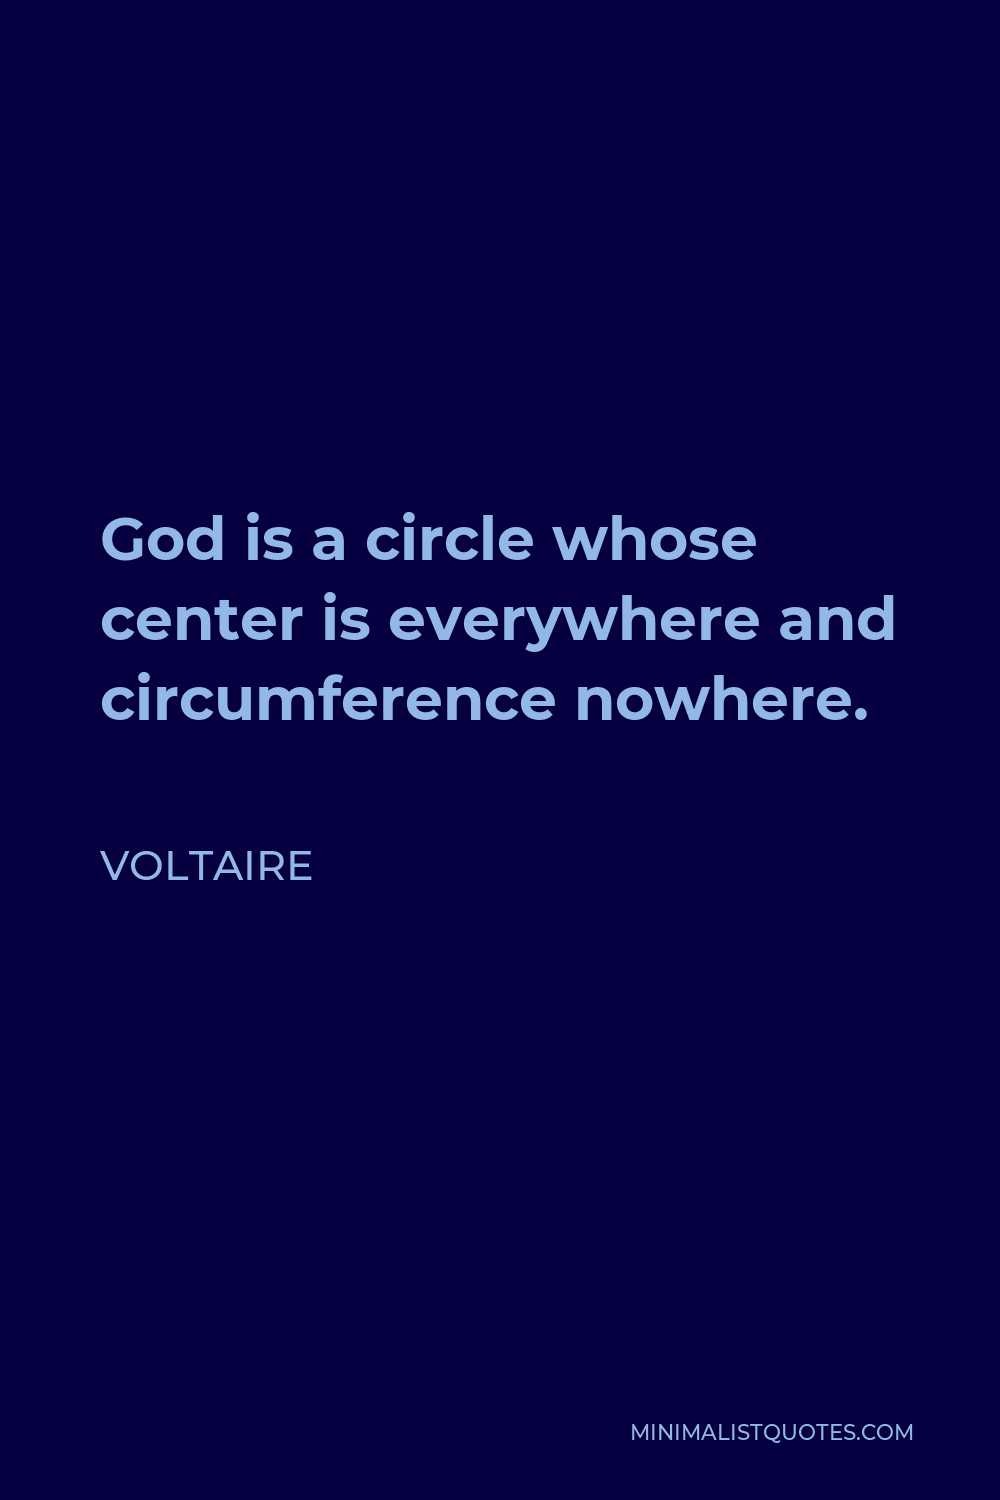 Voltaire Quote - God is a circle whose center is everywhere and circumference nowhere.